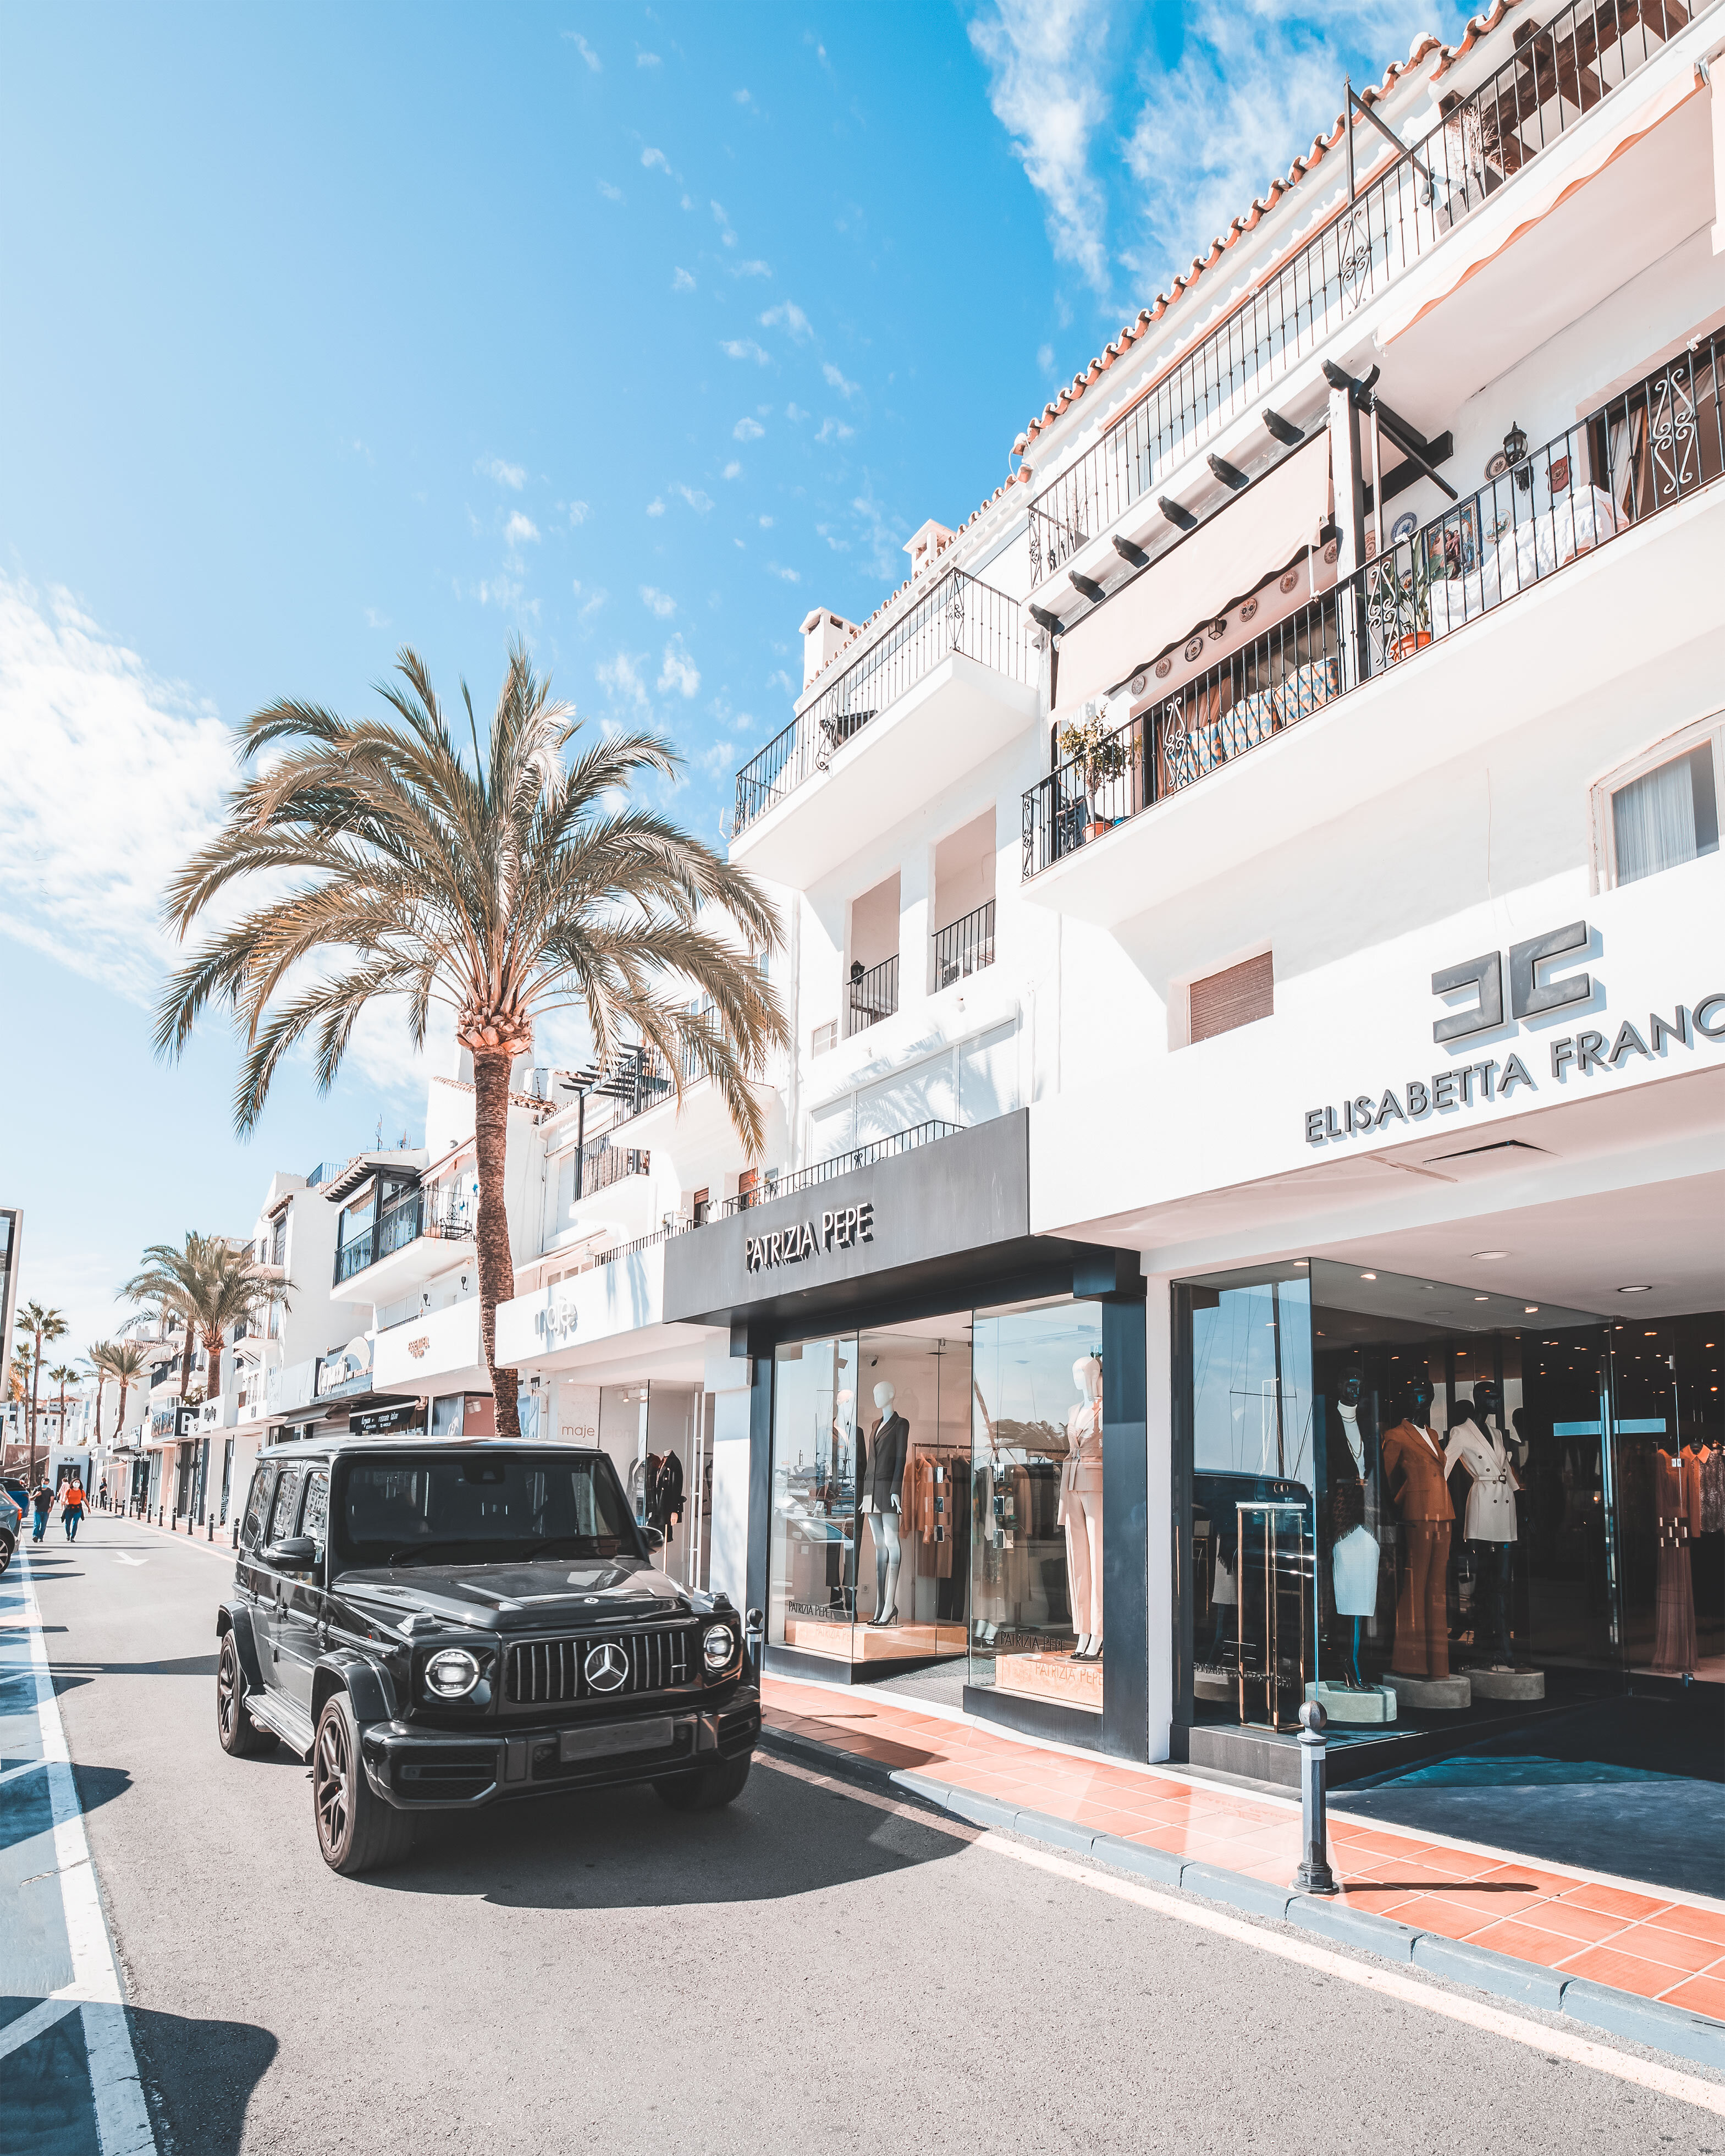 MARBELLA TURISMO on X: Exclusive shopping boutiques in Puerto Banús 😍  React using 👏 if you'll choose Marbella as your destination for 2021! # Marbella #MarbellaTurismo #MarbellaTuDestino365 #CostadelSol #Andalusia  #Andalucia #